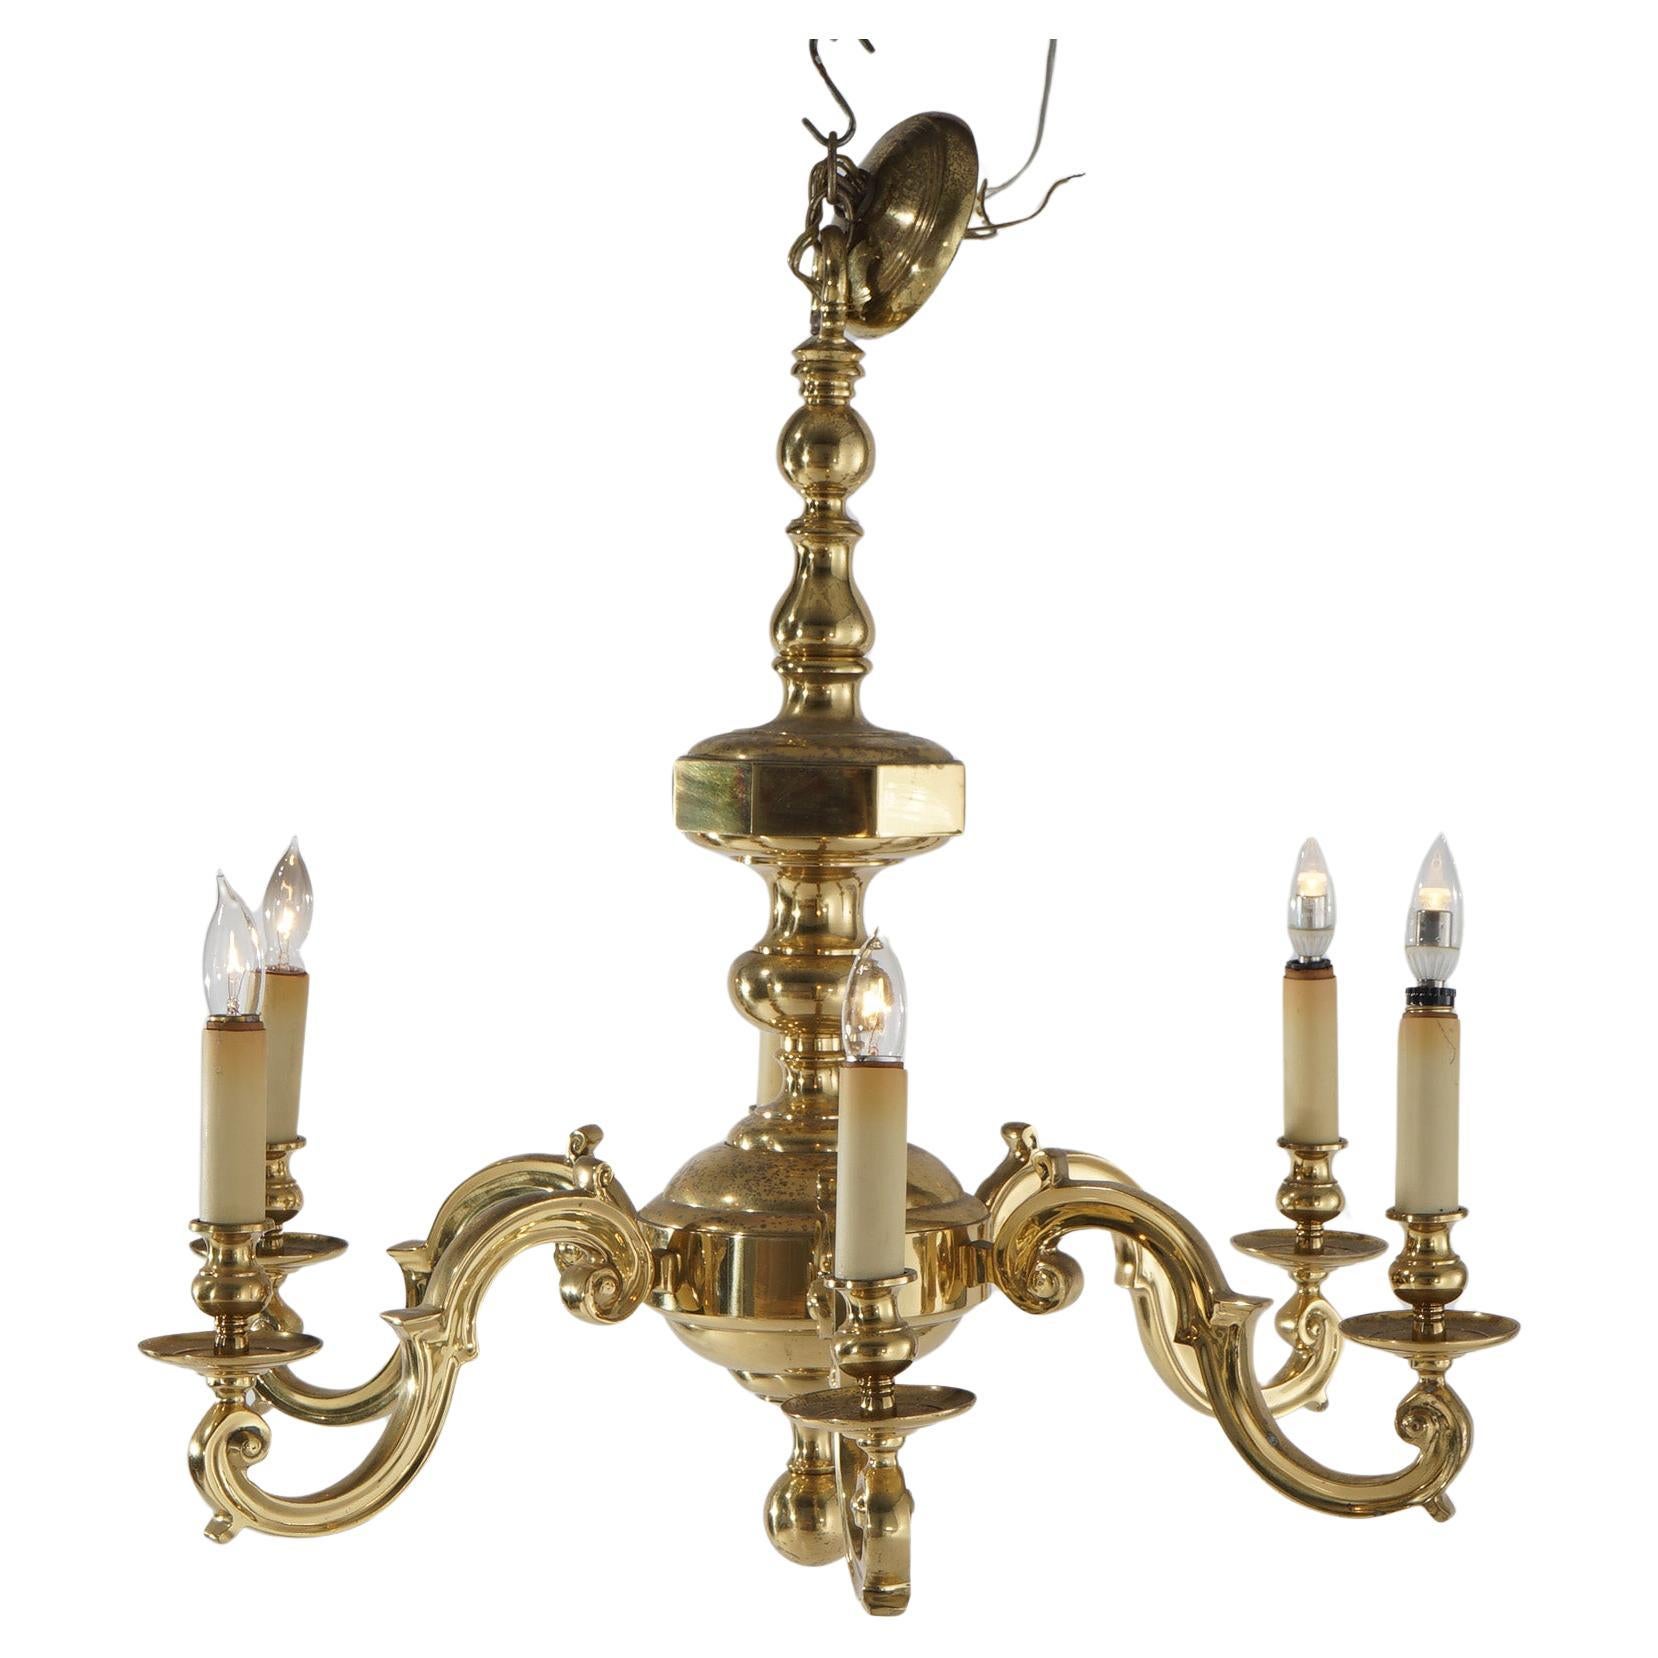 Large Antique Neoclassical Brass Six-Arm Scroll Form Chandelier C1930